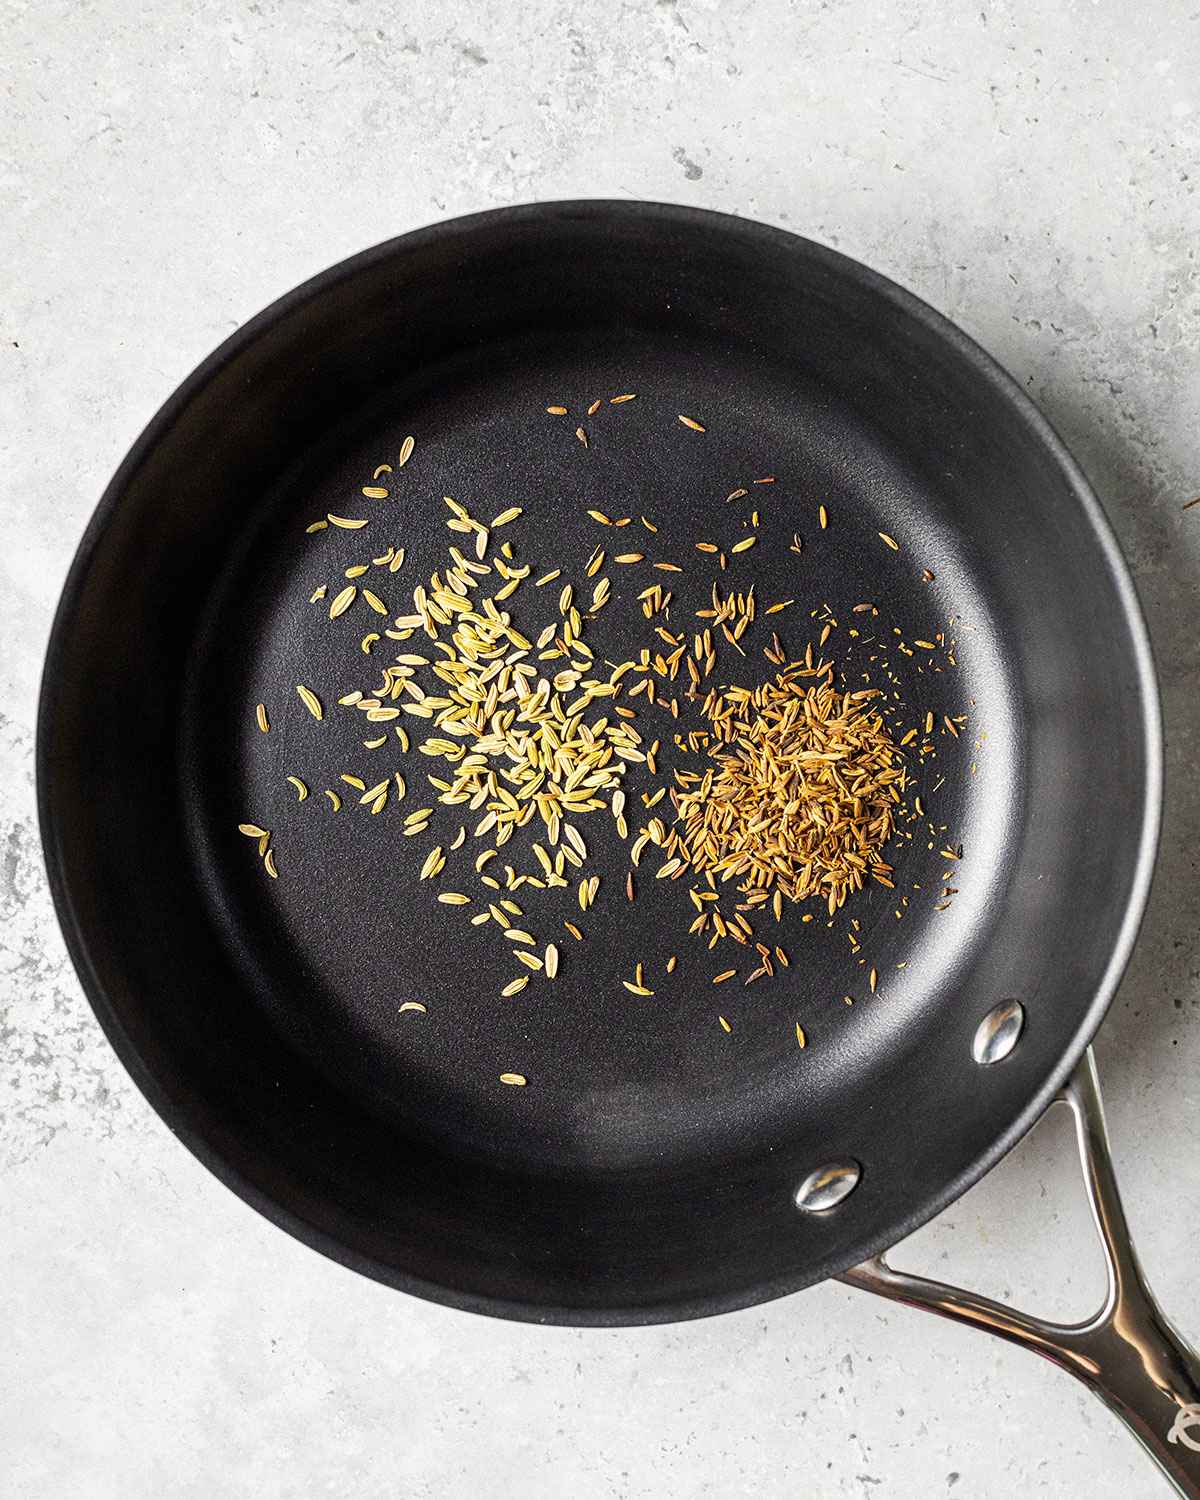 fennel seeds and cumin seeds in an Olav frying pan toasting